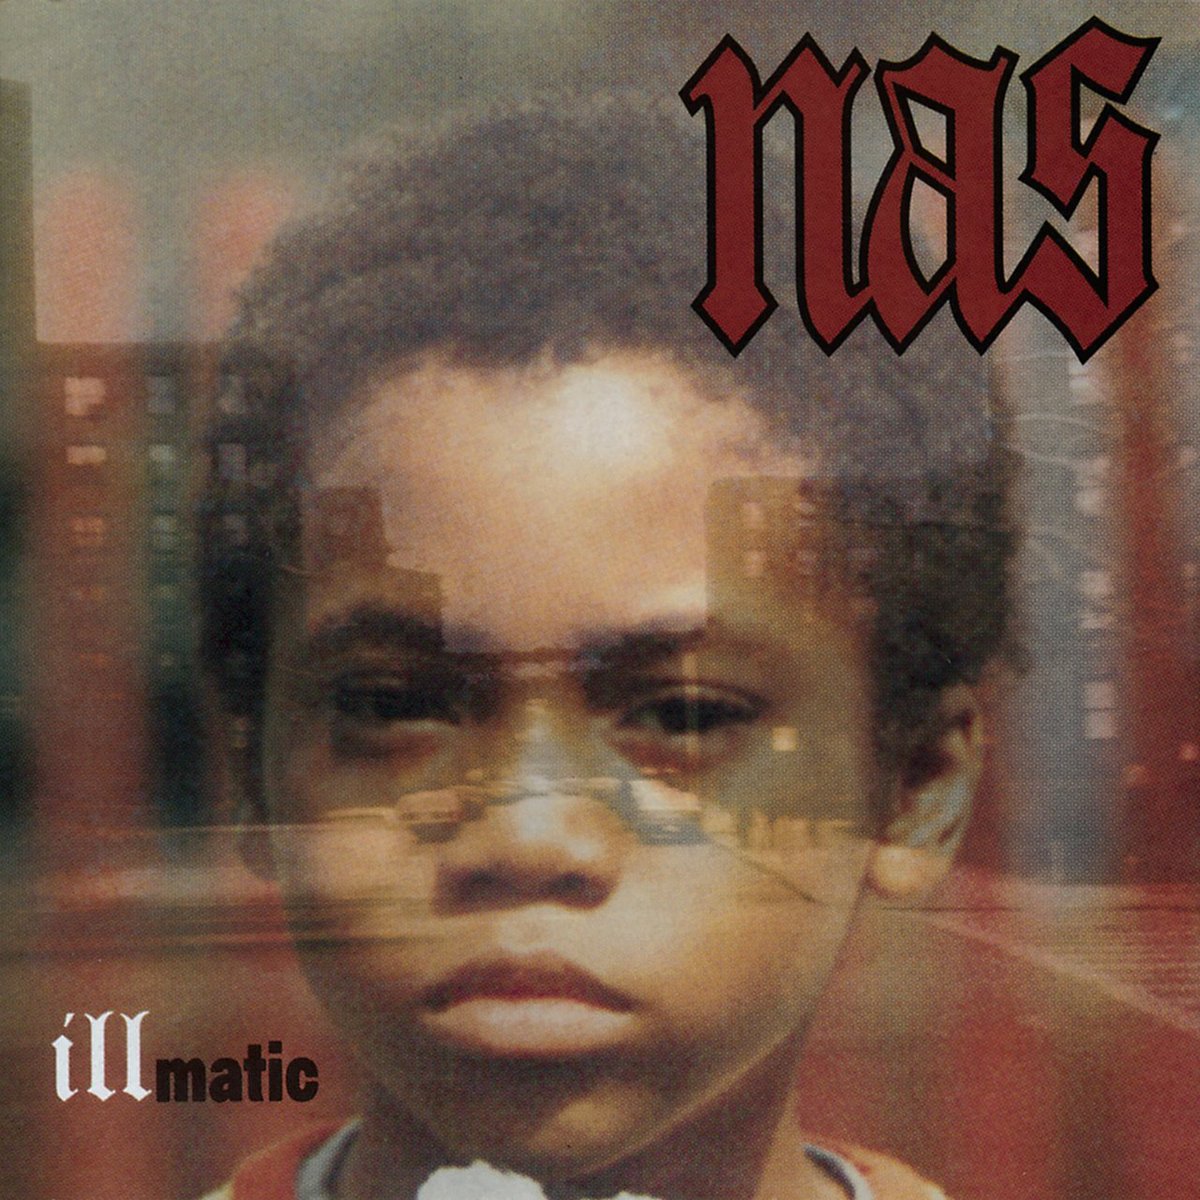 Happy 30th Illmatic 🥳🍻🌎. Listen to The World Is Yours by Nas tidal.com/track/28104736…